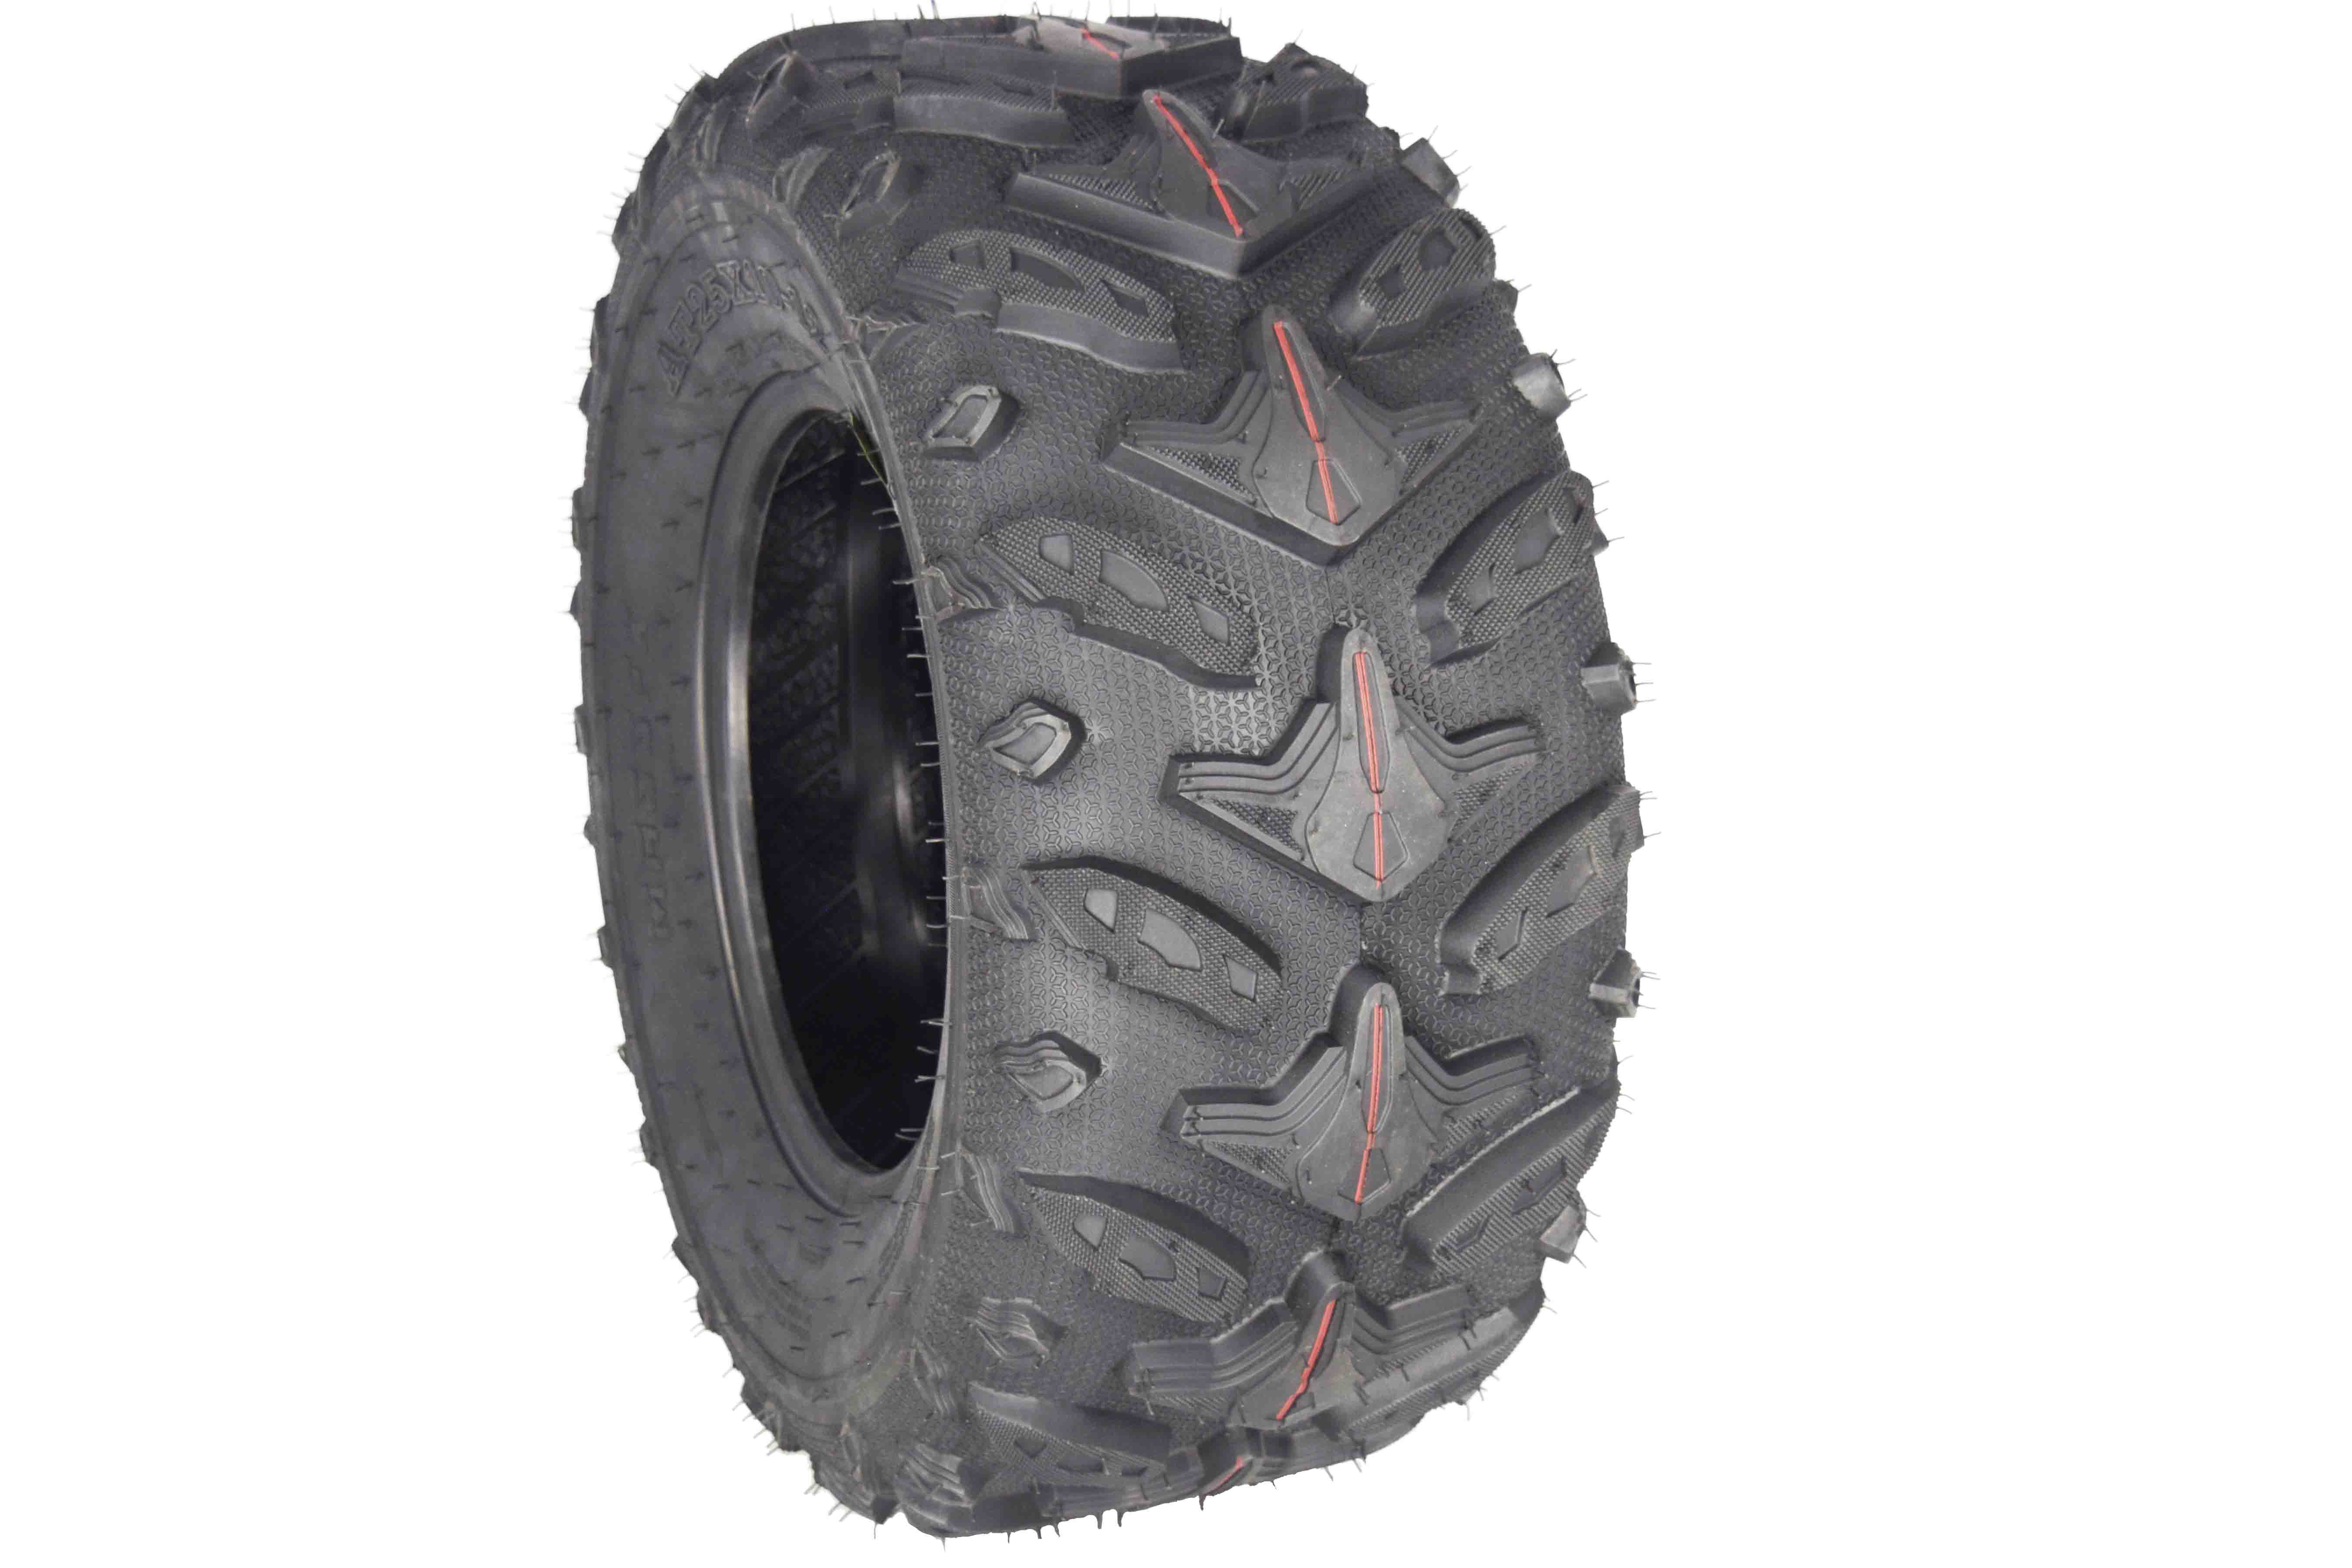 MASSFX Grinder 25x10-12 Rear ATV Tire 6 Ply for Soft/Hard Pack Ground (2 Pack)